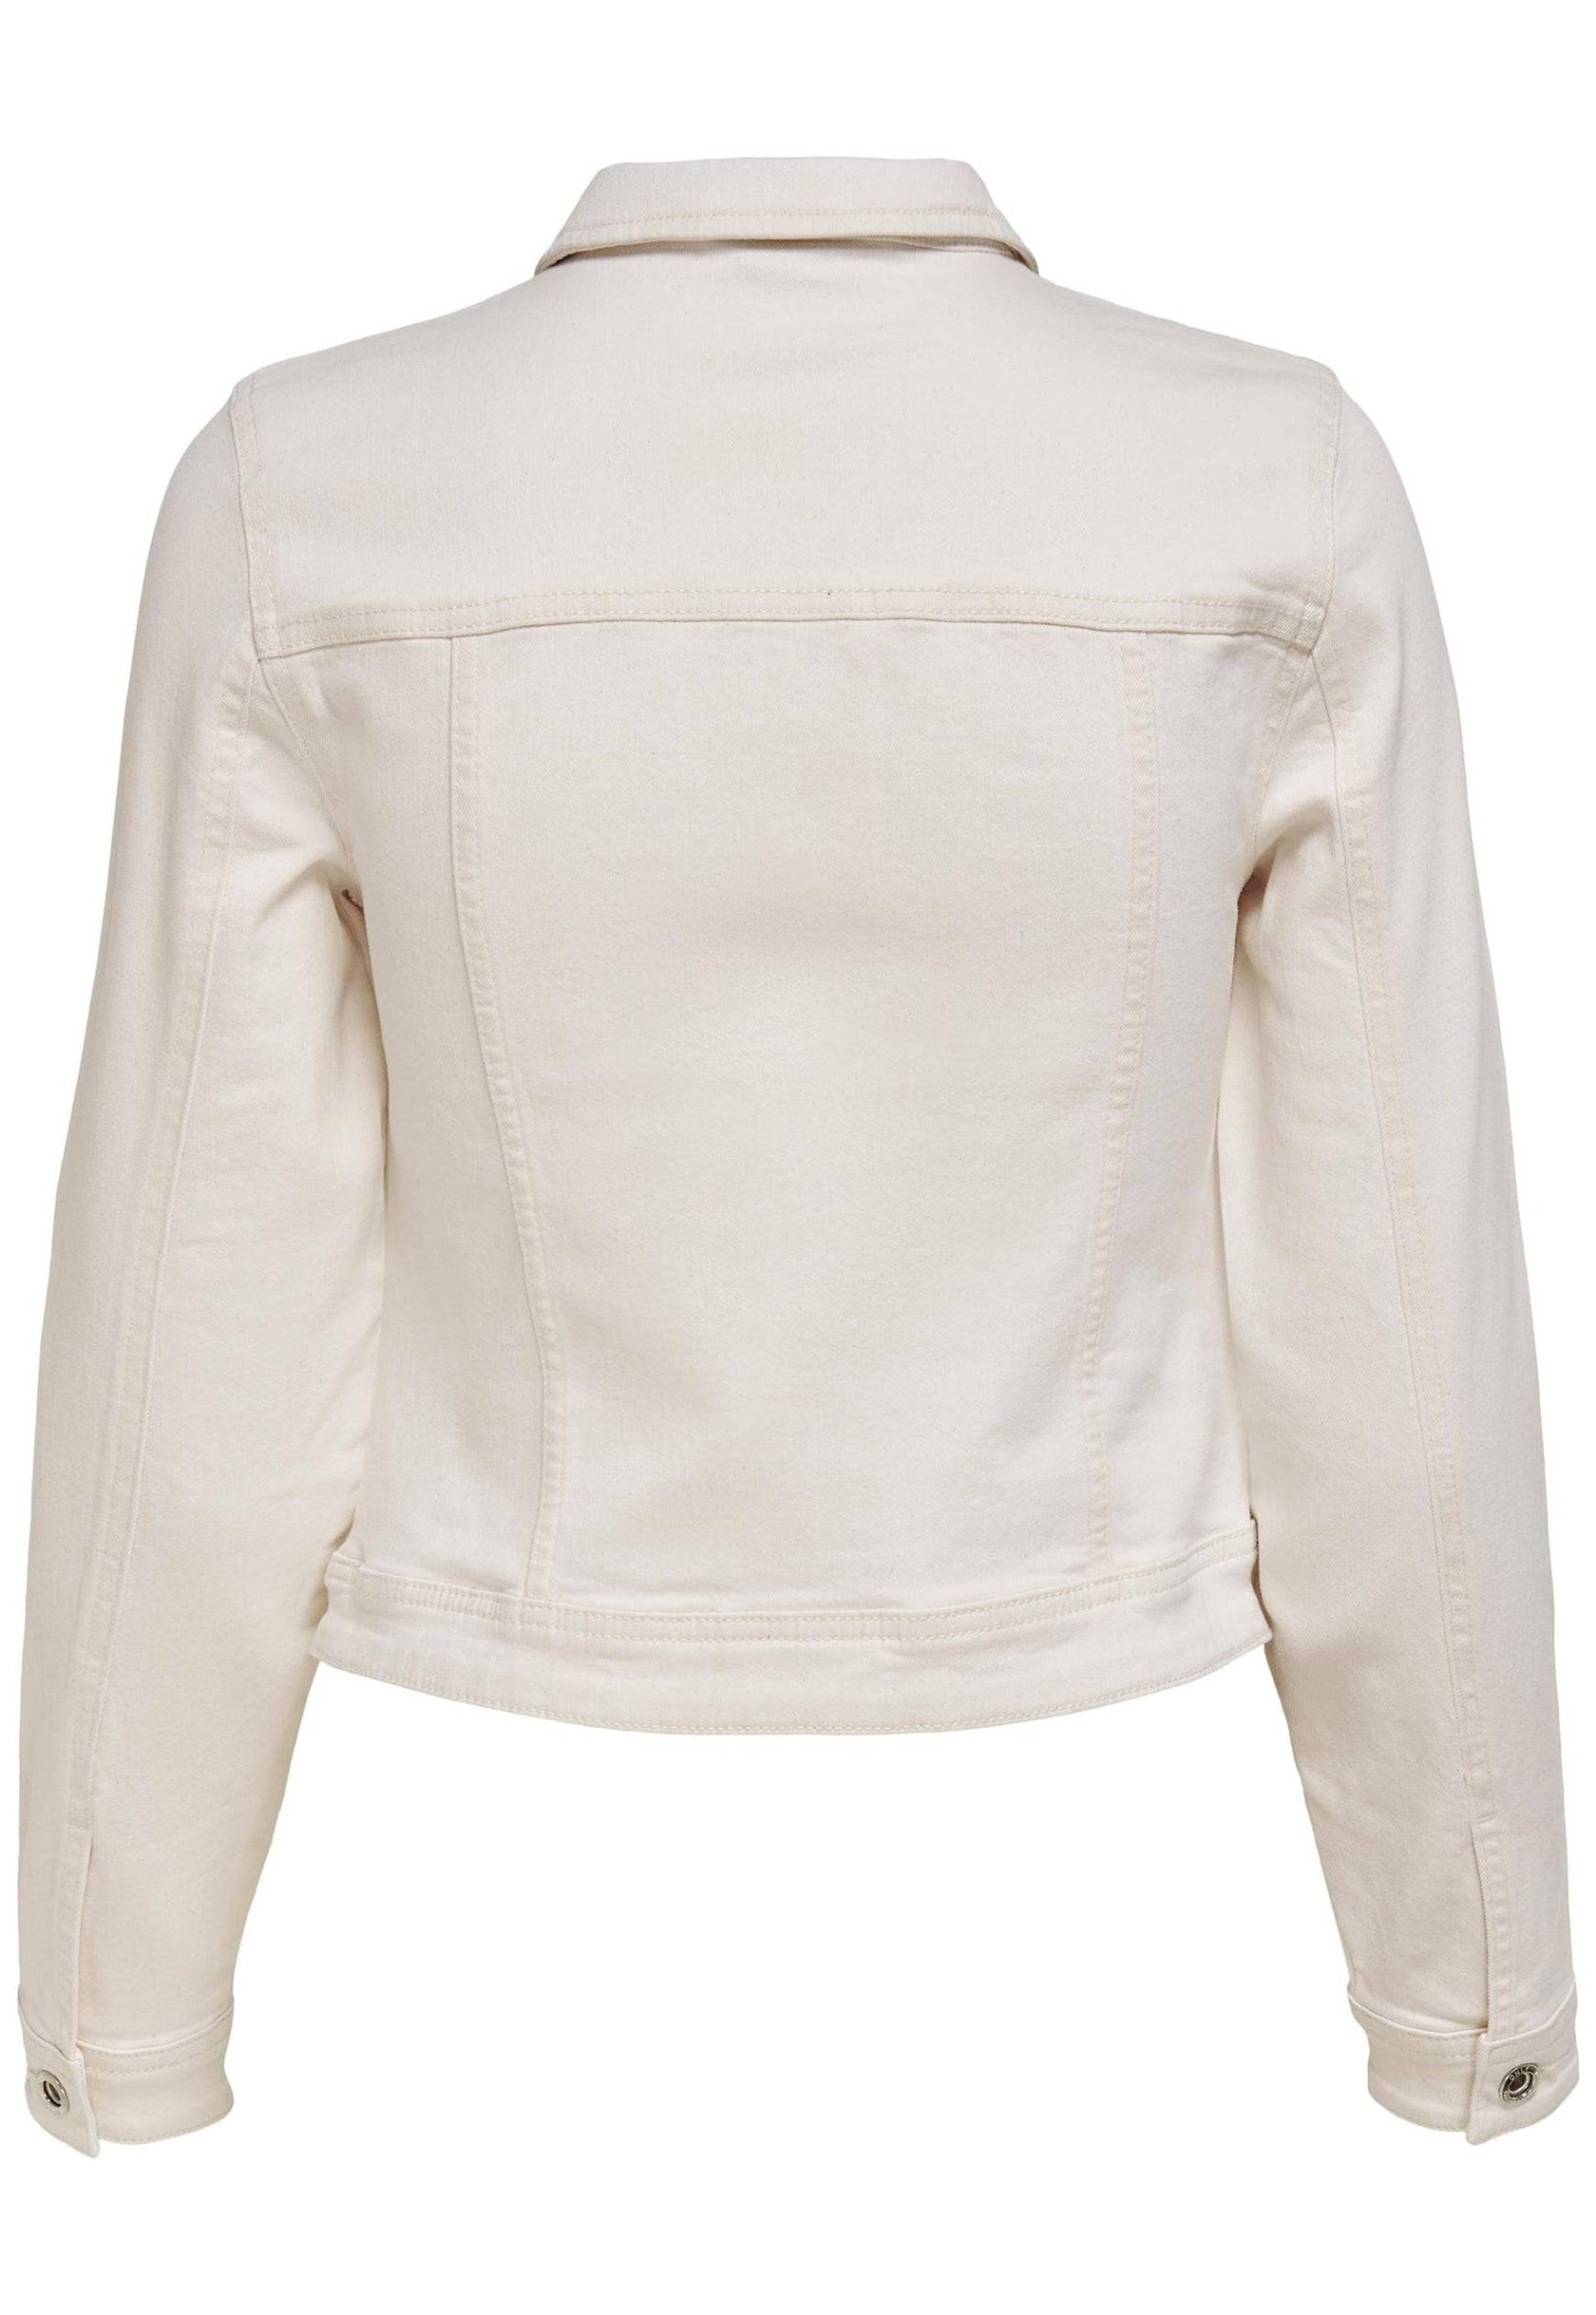 ONLY Tia Classic Denim Jacket in Ecru Cream | One Nation Clothing ONLY ...